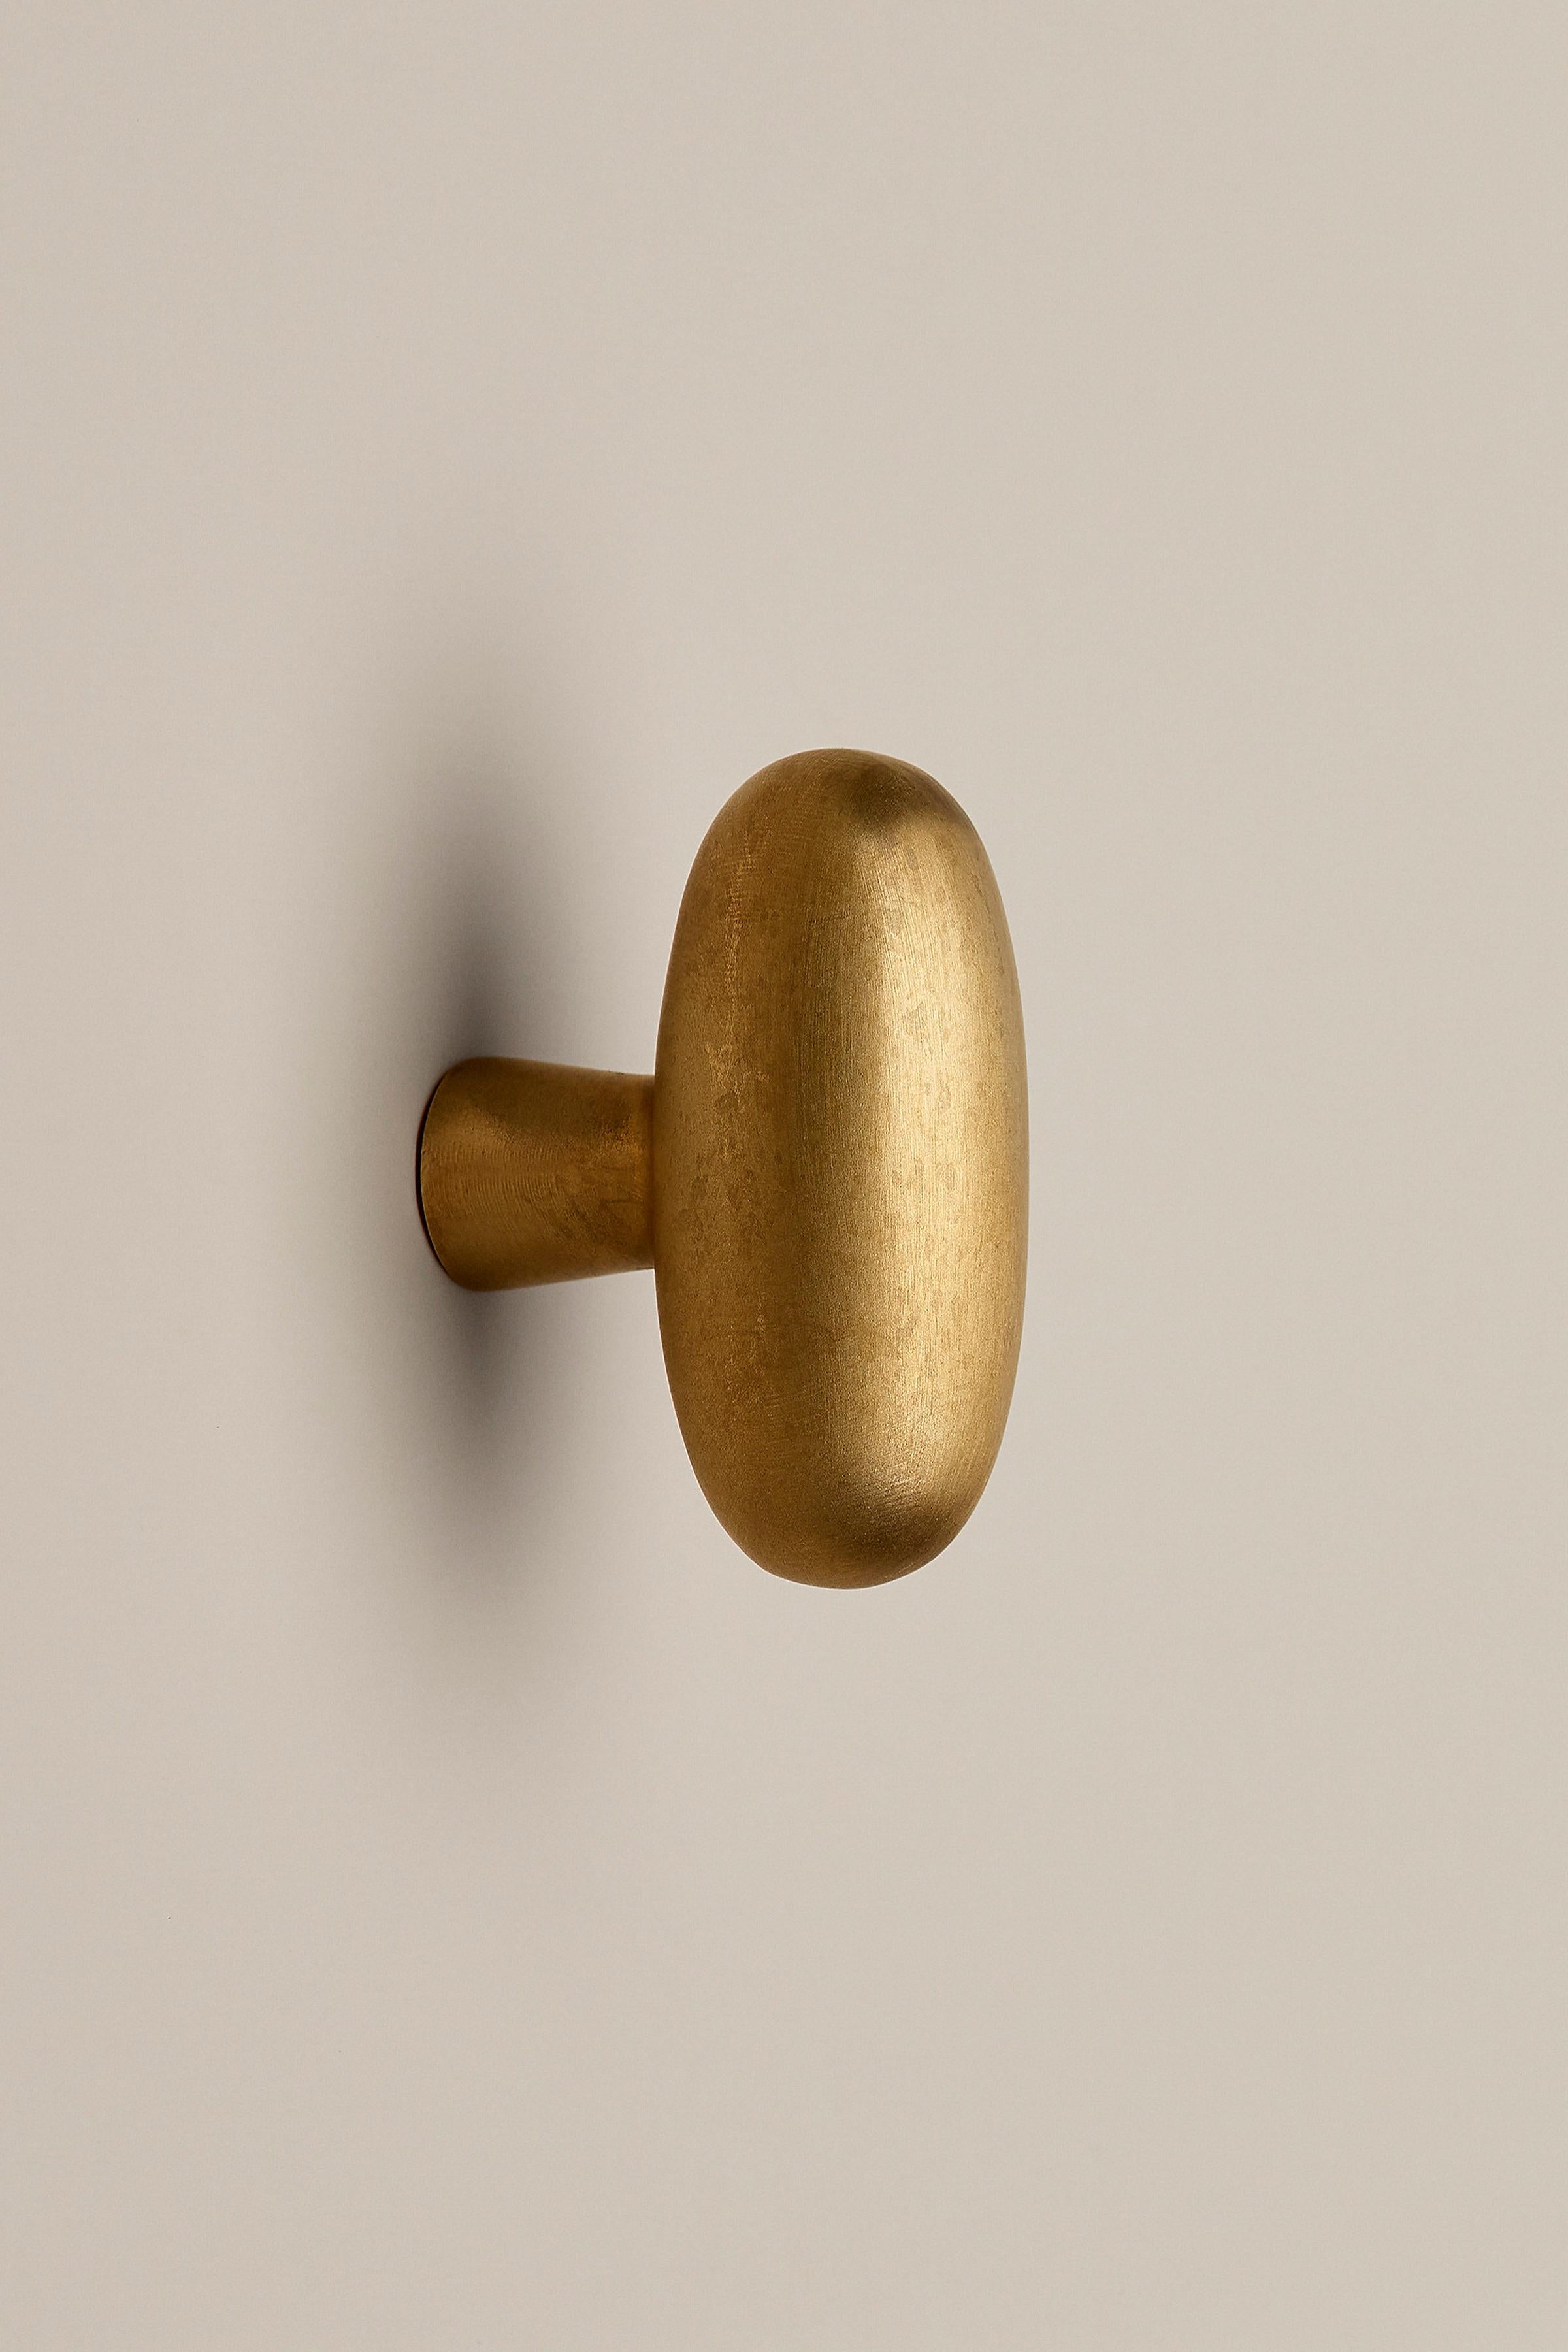 Contemporary Door Handle / Knob 'Blunt' by Spaces Within, Polished Brass For Sale 2